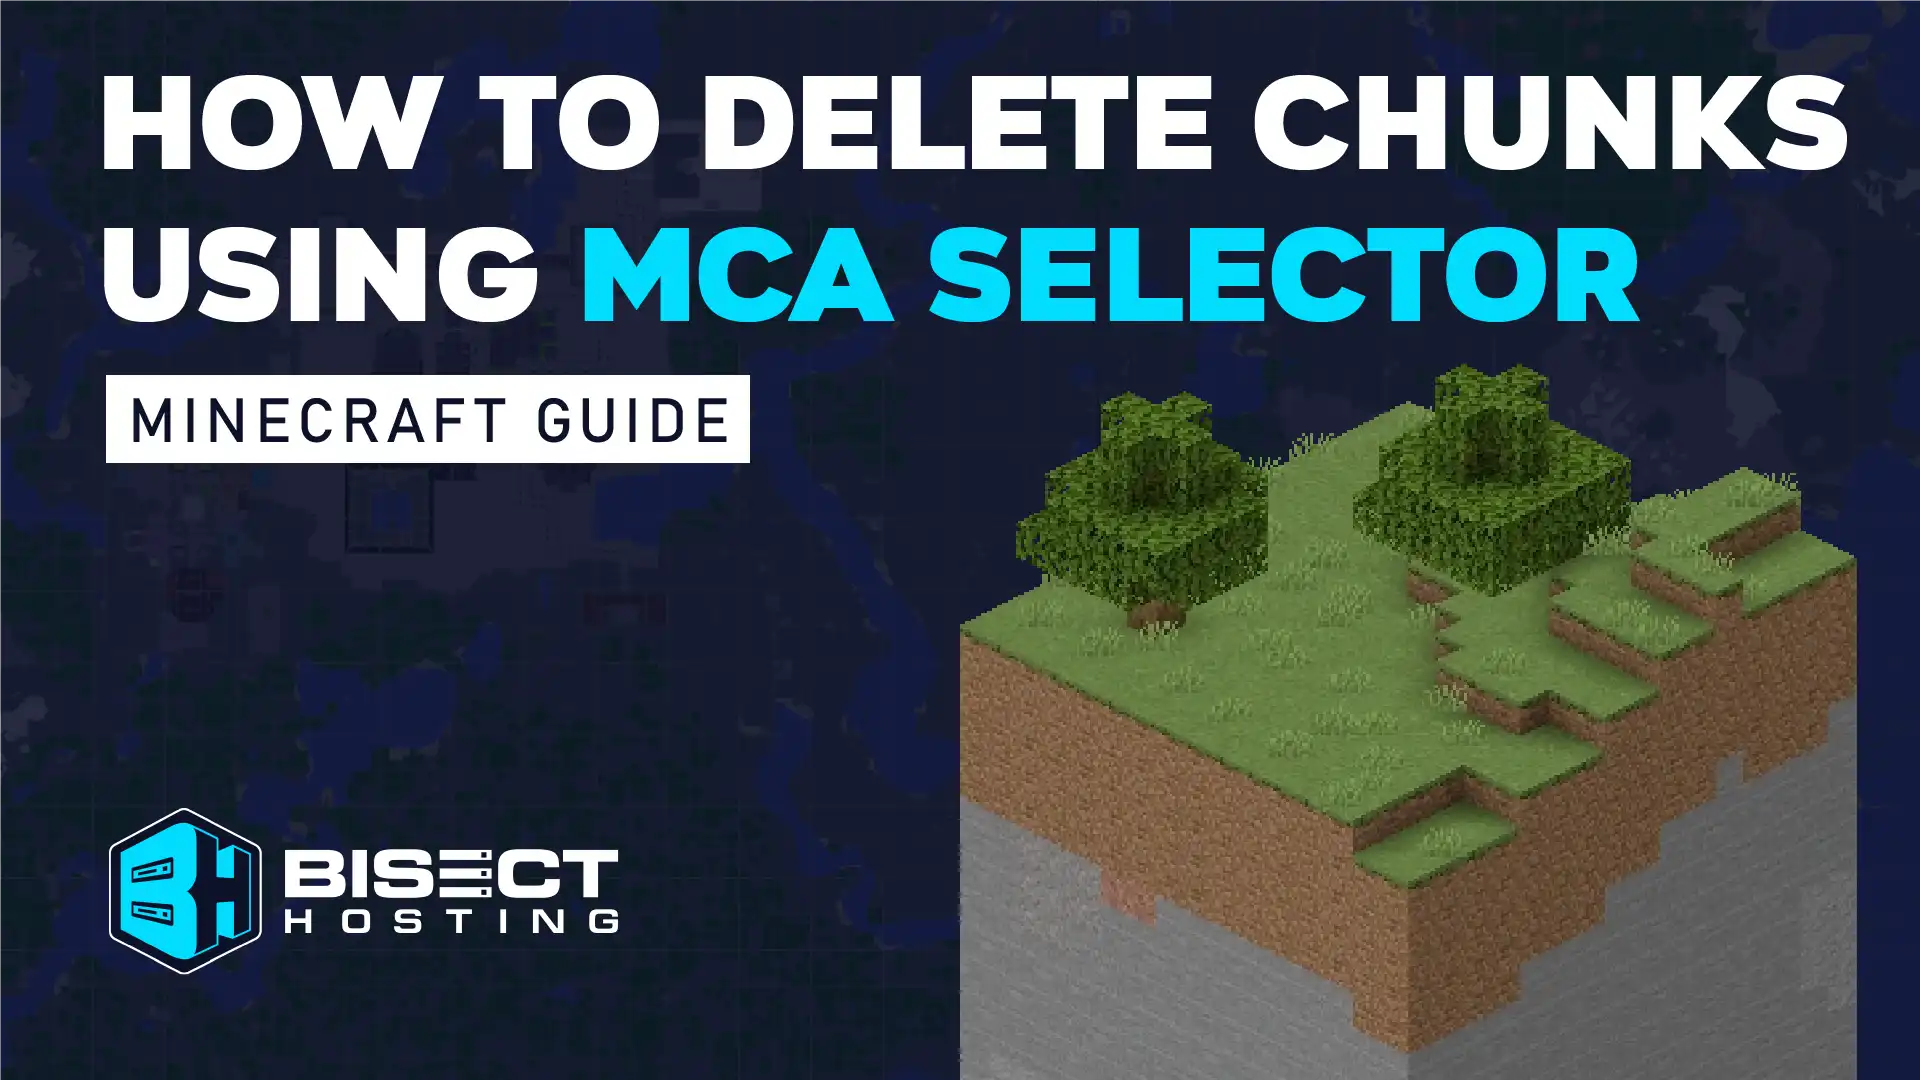 How to Delete Chunks using MCA Selector